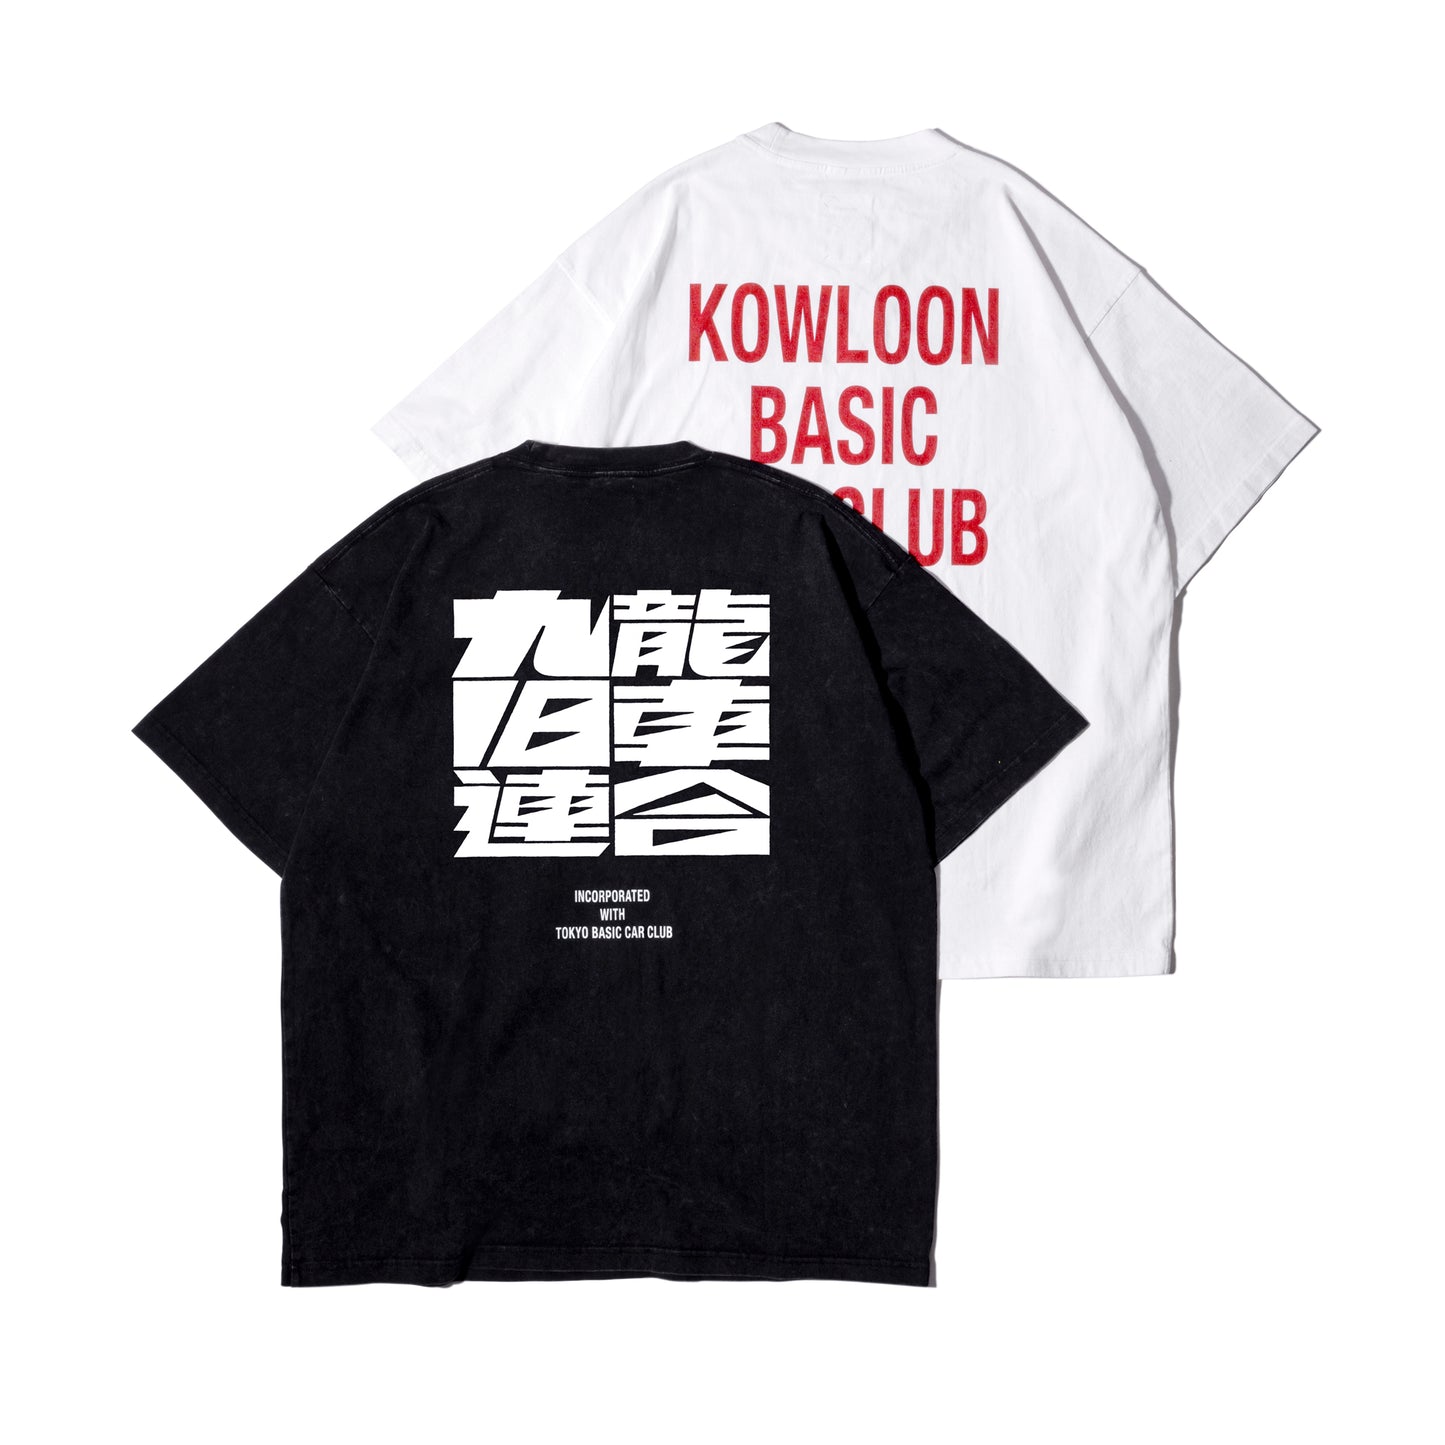 KBCC Crew Heavy Washed Tee / White